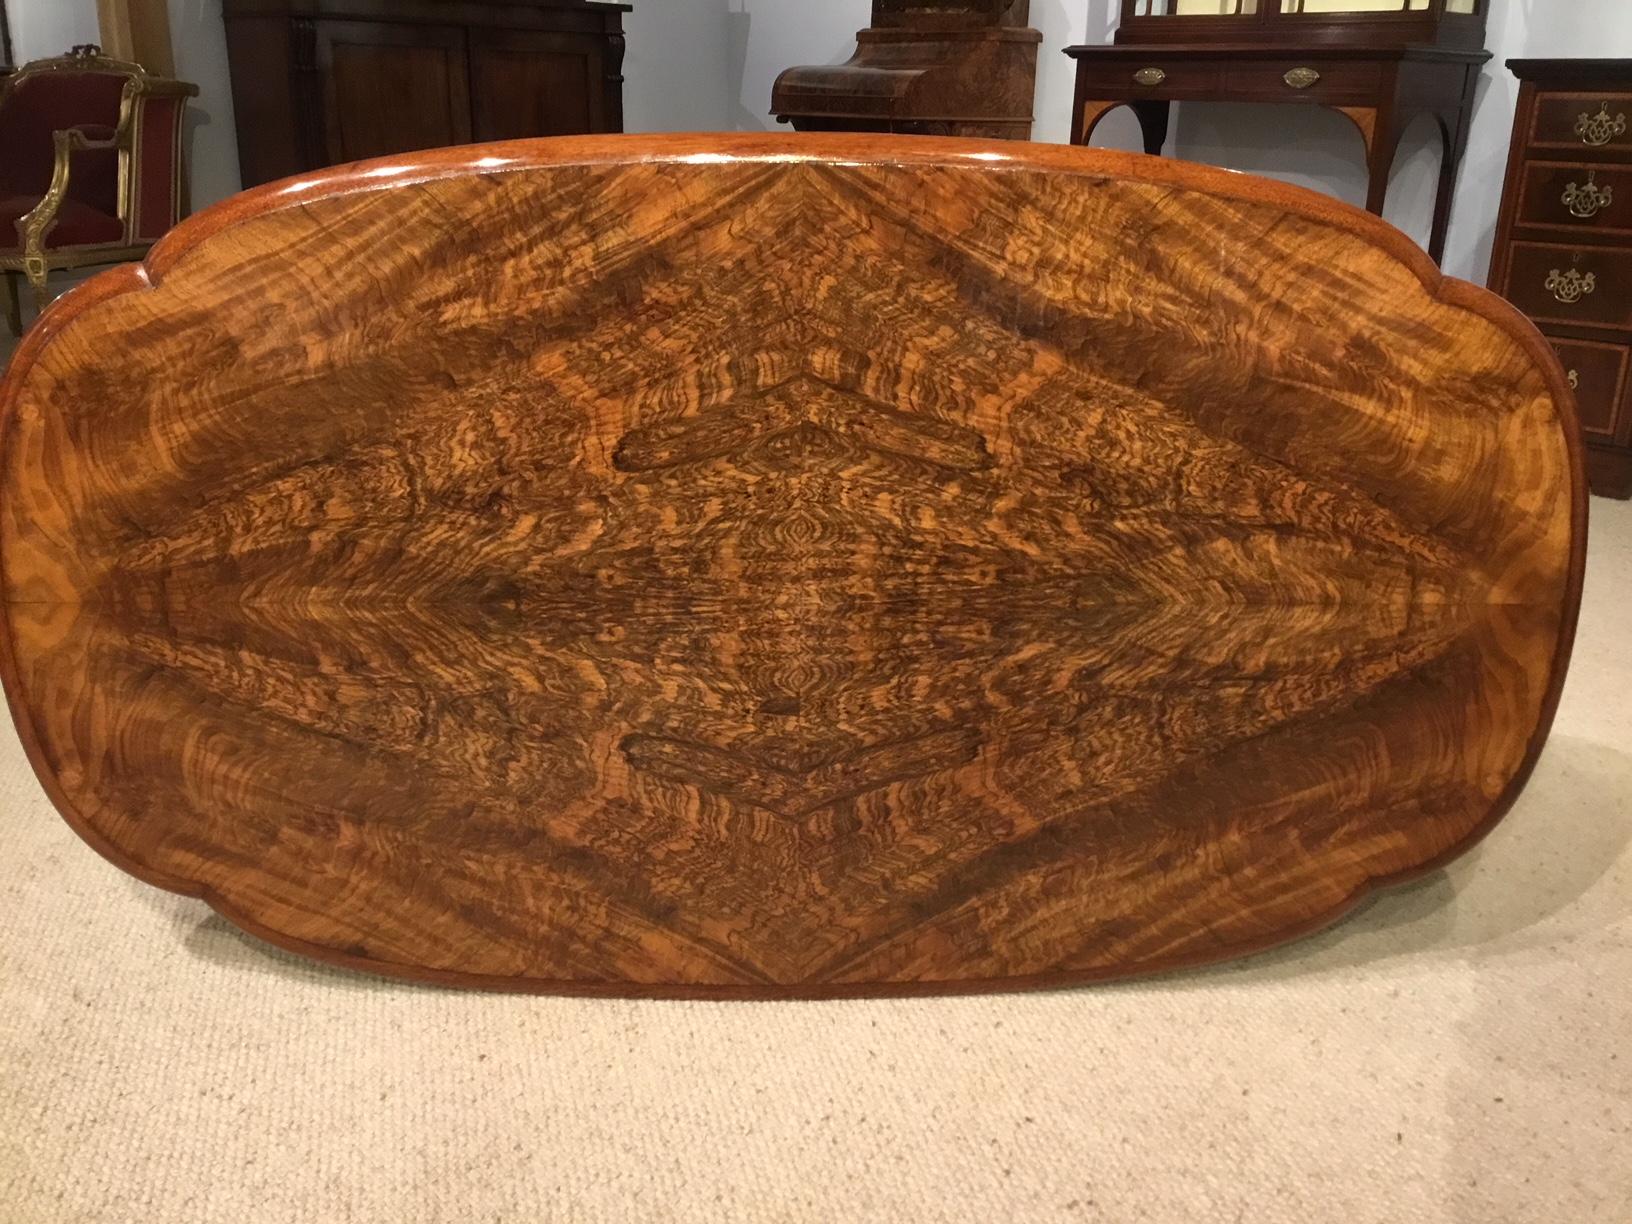 A beautiful burr walnut Victorian Period antique coffee table. Having an oval top veneered in beautifully figured burr walnut with walnut molding and frieze. Supported on four turned and fluted columns with finely carved floral detail and a central